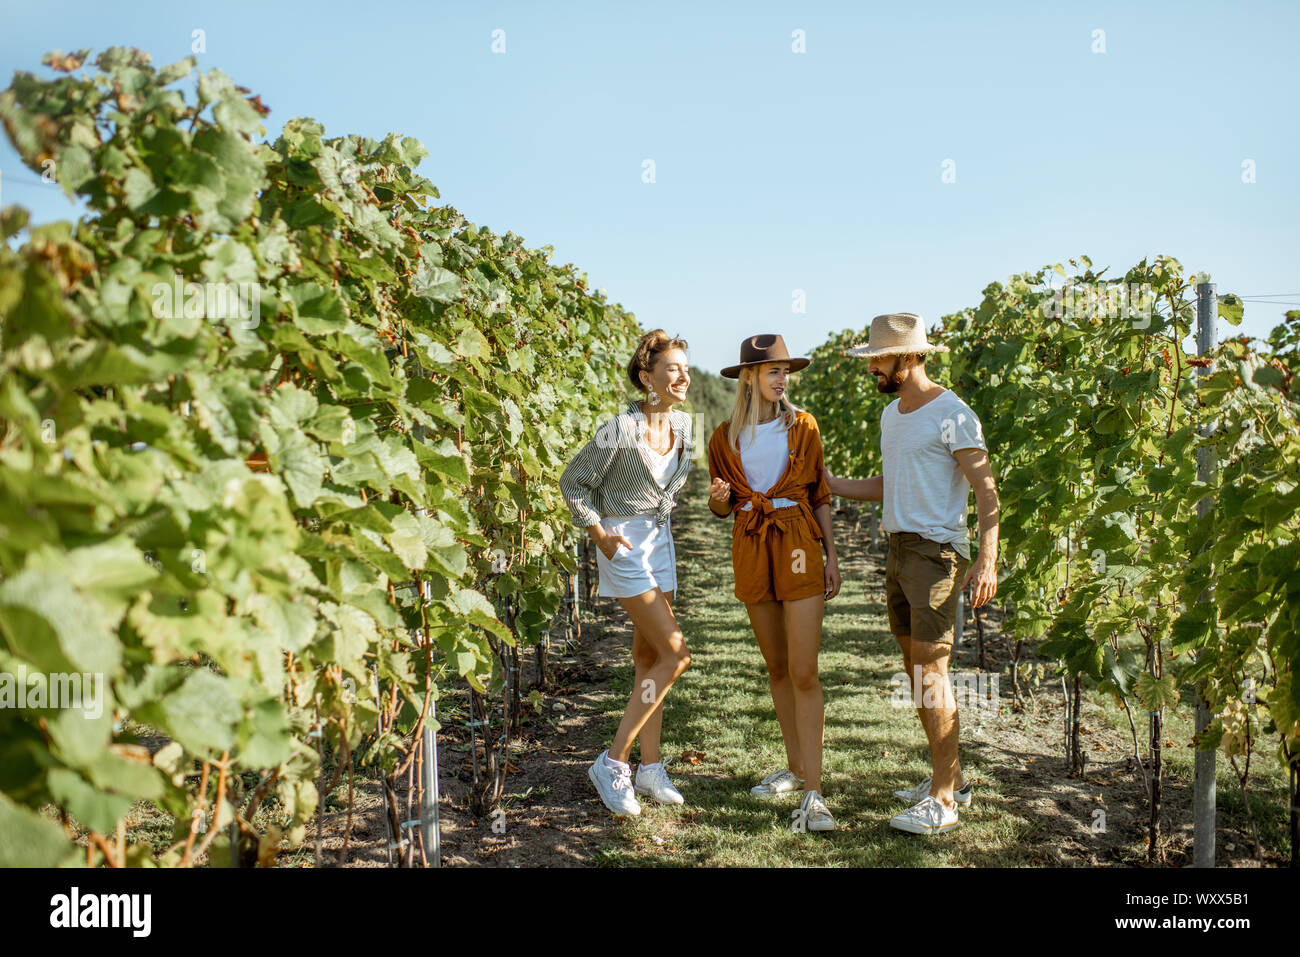 Group of a young friends hanging out together on the vineyard during a sunny morning Stock Photo